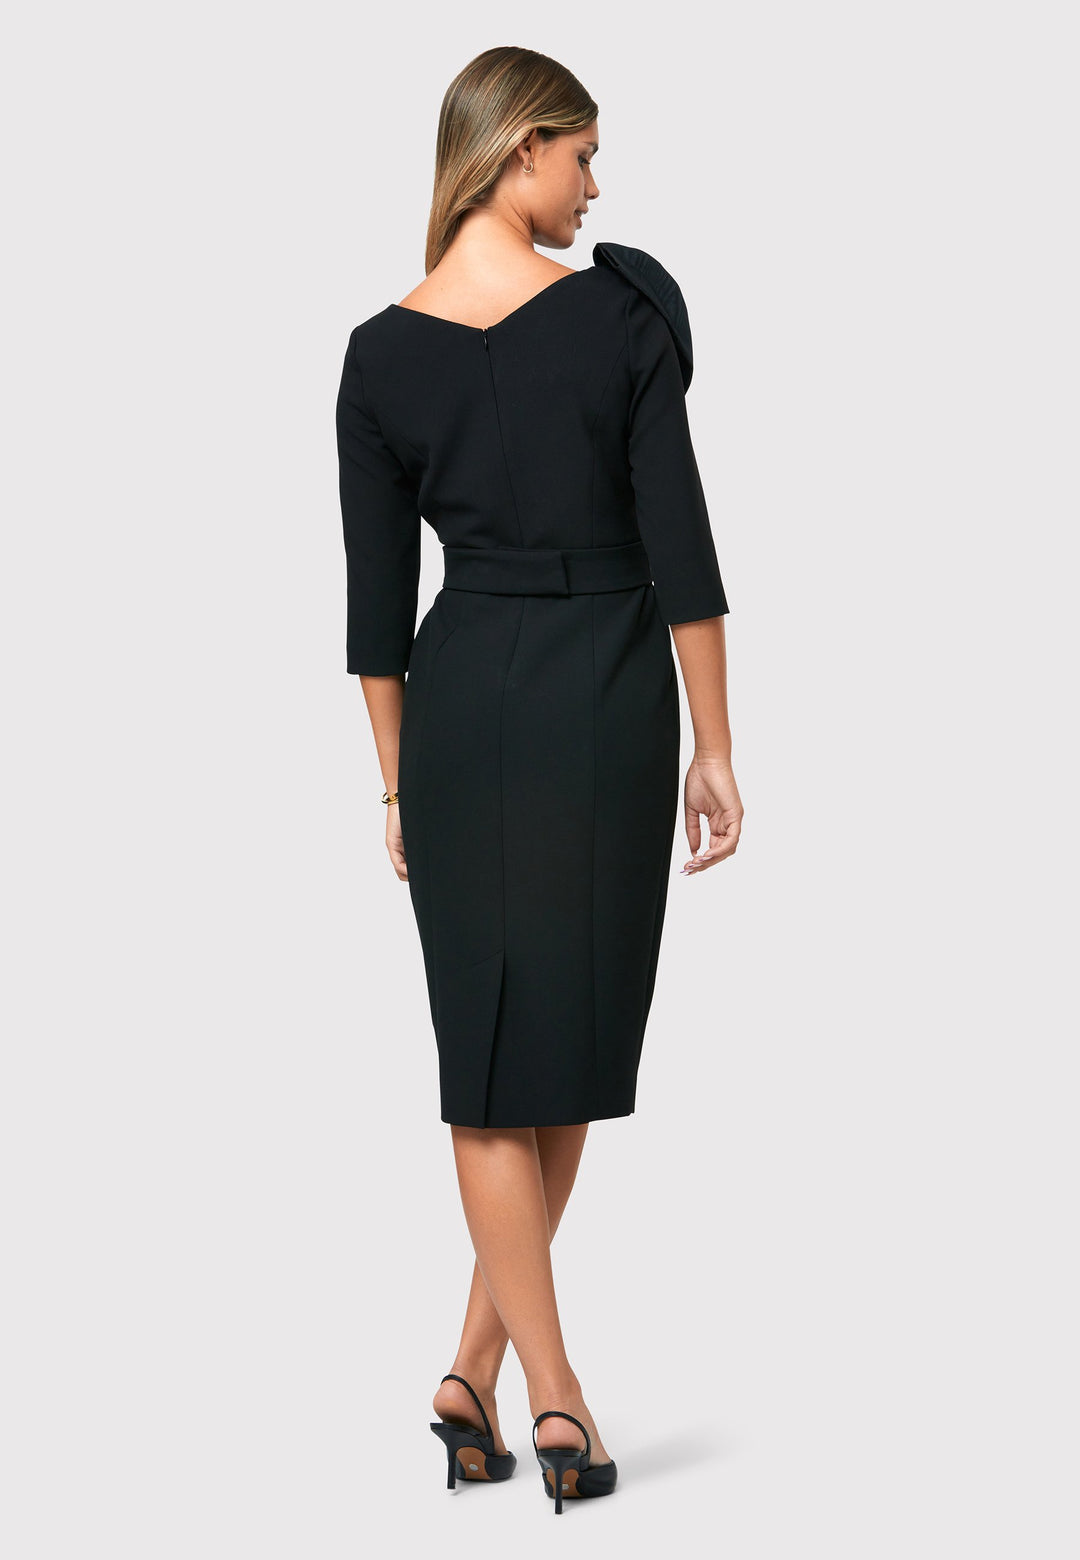 Introducing the Isadora Black Dress, a modern take on a classic Helen McAlinden design. With its exquisite craftsmanship and flattering silhouette, it accentuates your figure while offering practicality with pockets, a detachable belt, and a pencil skirt that elegantly falls to a mid-calf length. Adding to its versatility, the Isadora Black Dress features a detachable moire design bow that can be styled in multiple ways.